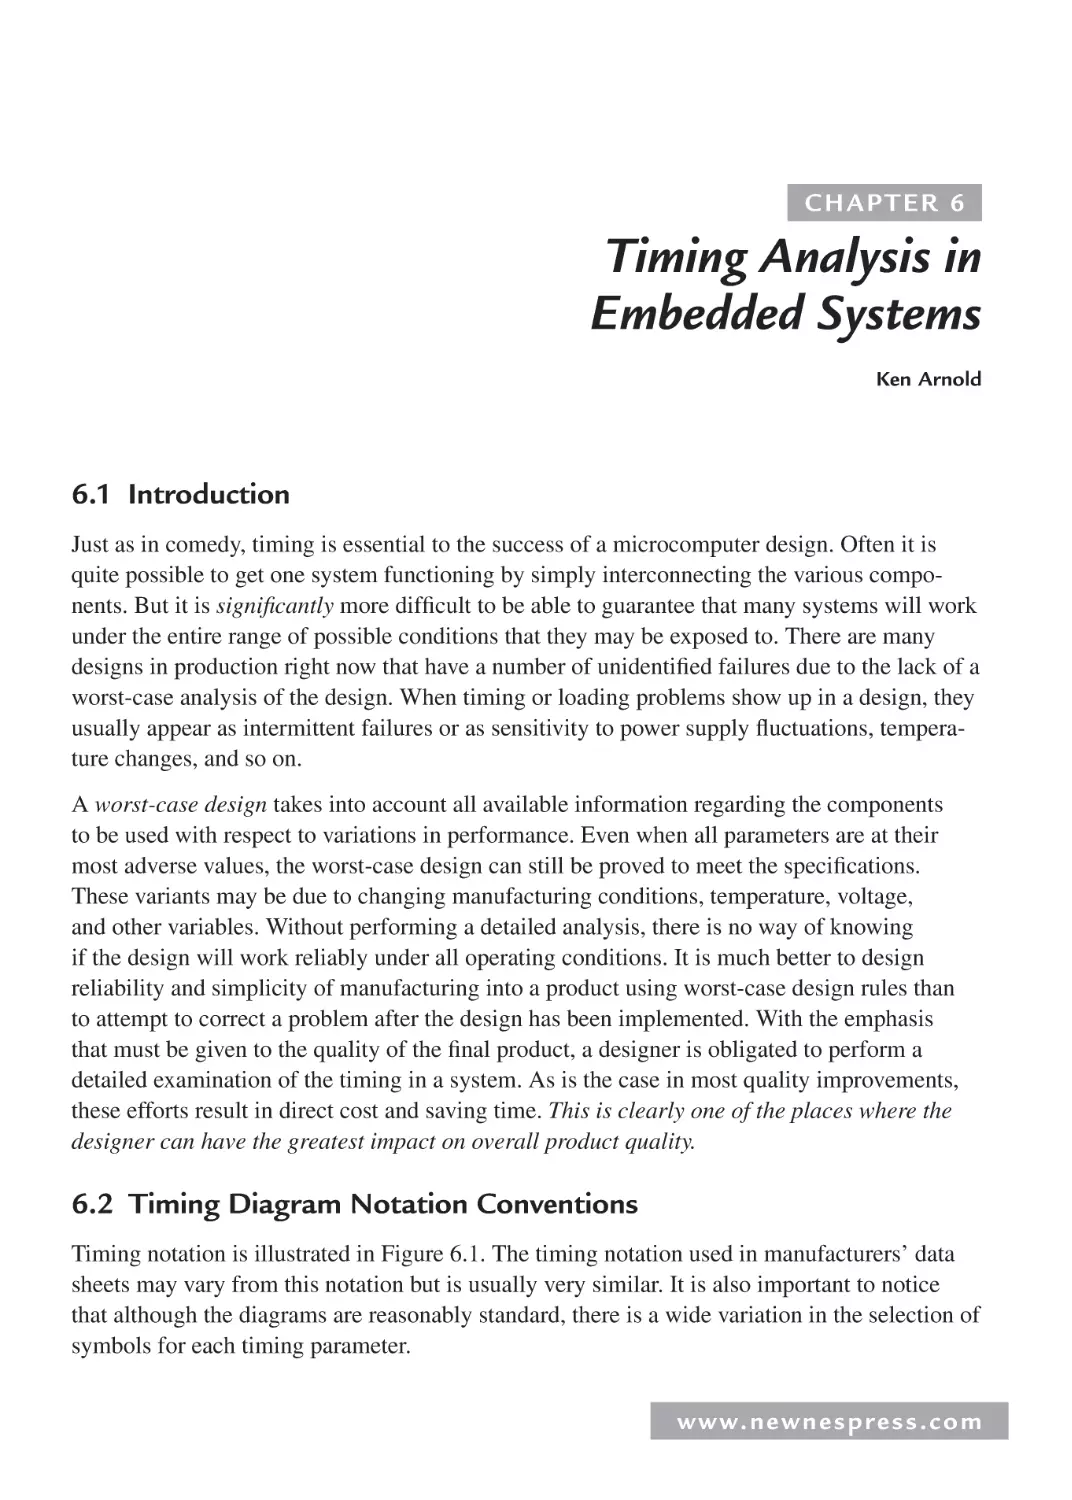 6 Analysis in Embedded Systems
6.1 Introduction
6.2 Timing Diagram Notation Conventions